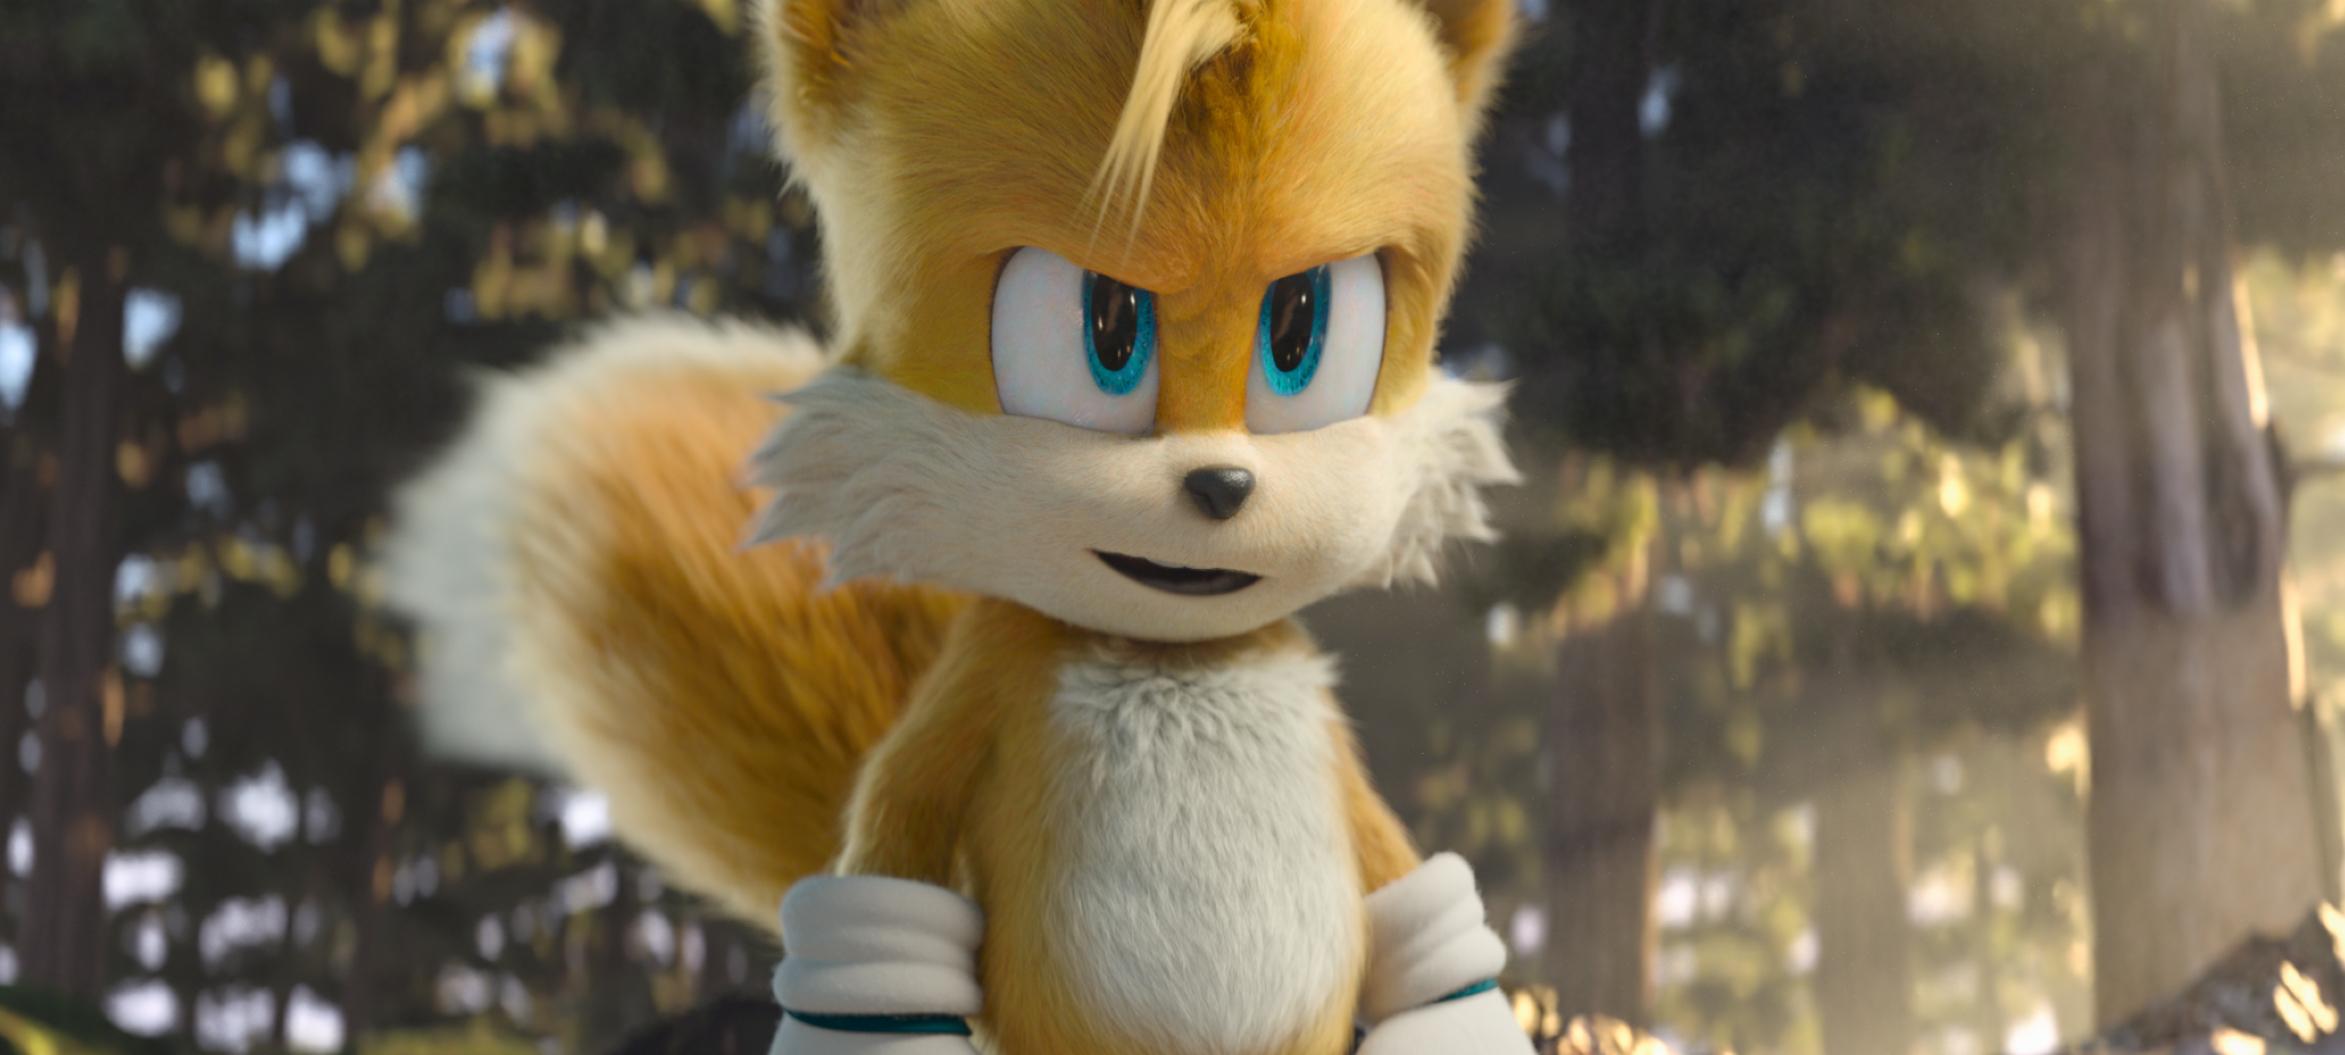 Does Tails Die in 'Sonic the Hedgehog 2'? Here's What We Know